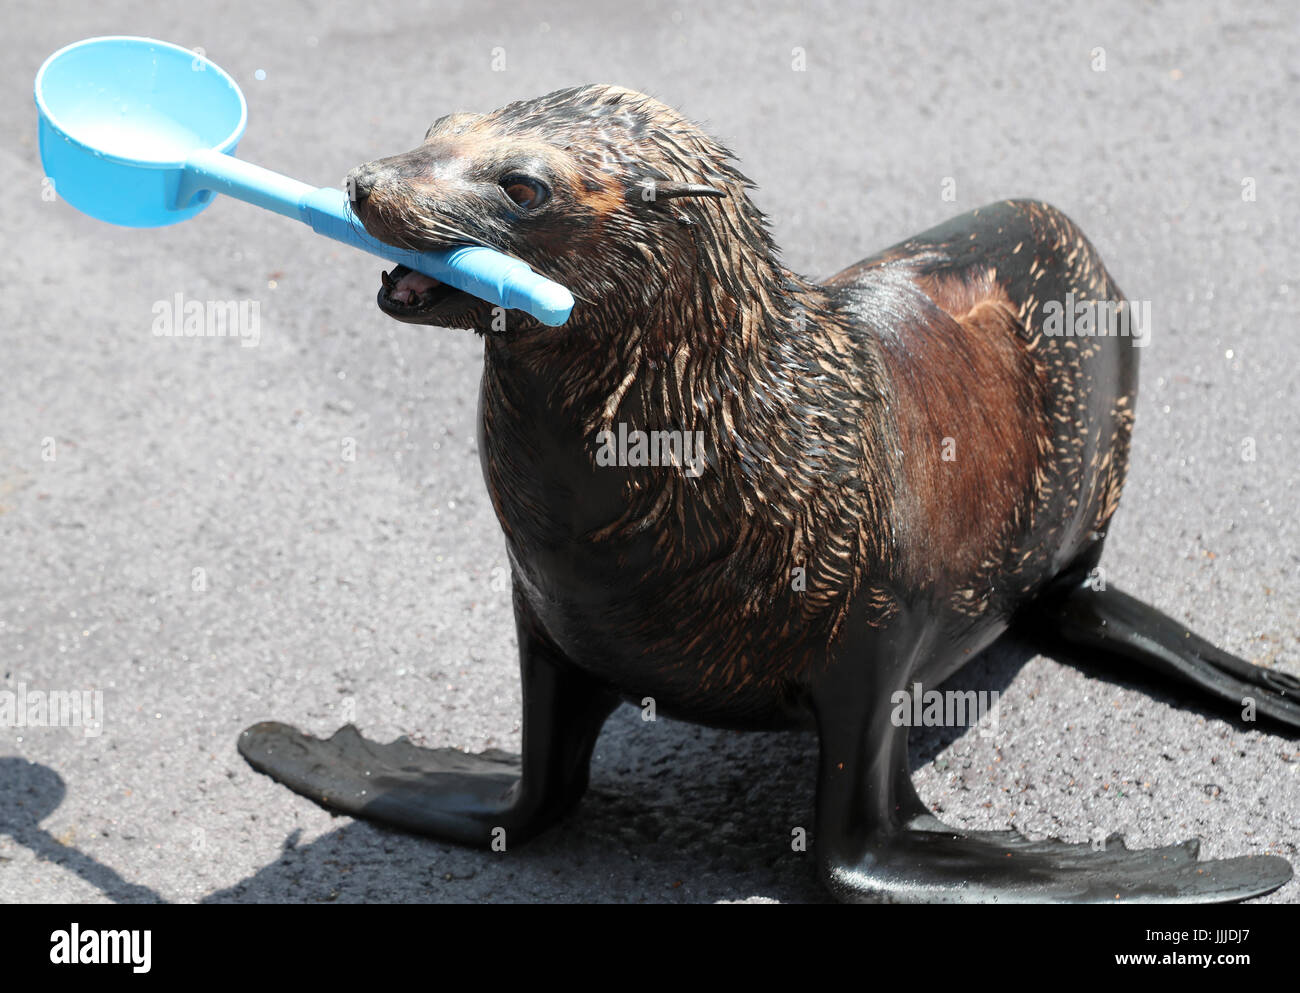 Tokyo, Japan. 20th July, 2017. 11-year-old female sea lion "Shakitto" uses a ladle to sprinkle water onto the pavement to cool down for the uchimizu event at the Aqua Park Shinagawa aquarium in Tokyo on Thursday, July 20, 2017. Tokyo's temperature soared over 32-degree Celsius as the rainy season has officially ended on July 19. Credit: Yoshio Tsunoda/AFLO/Alamy Live News Stock Photo